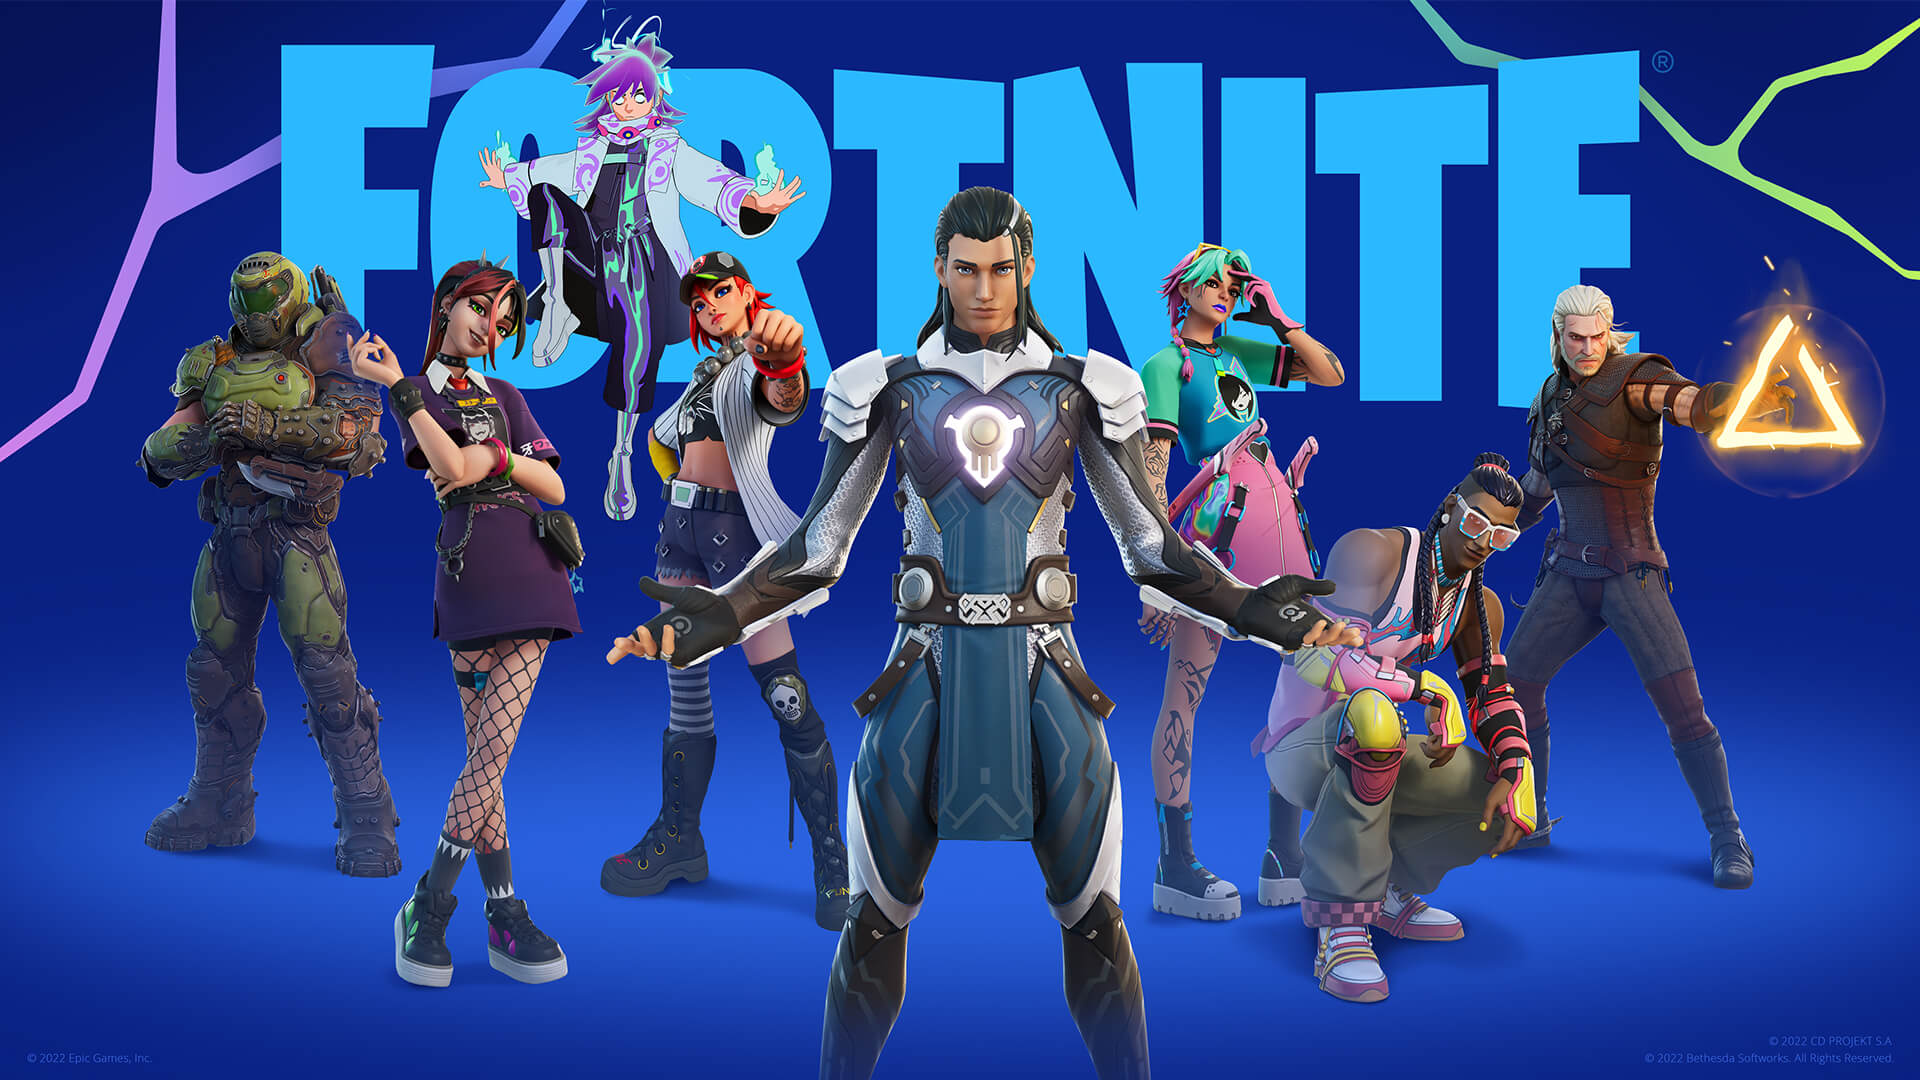 Fortnite Review: The Ultimate Battle Royale Game